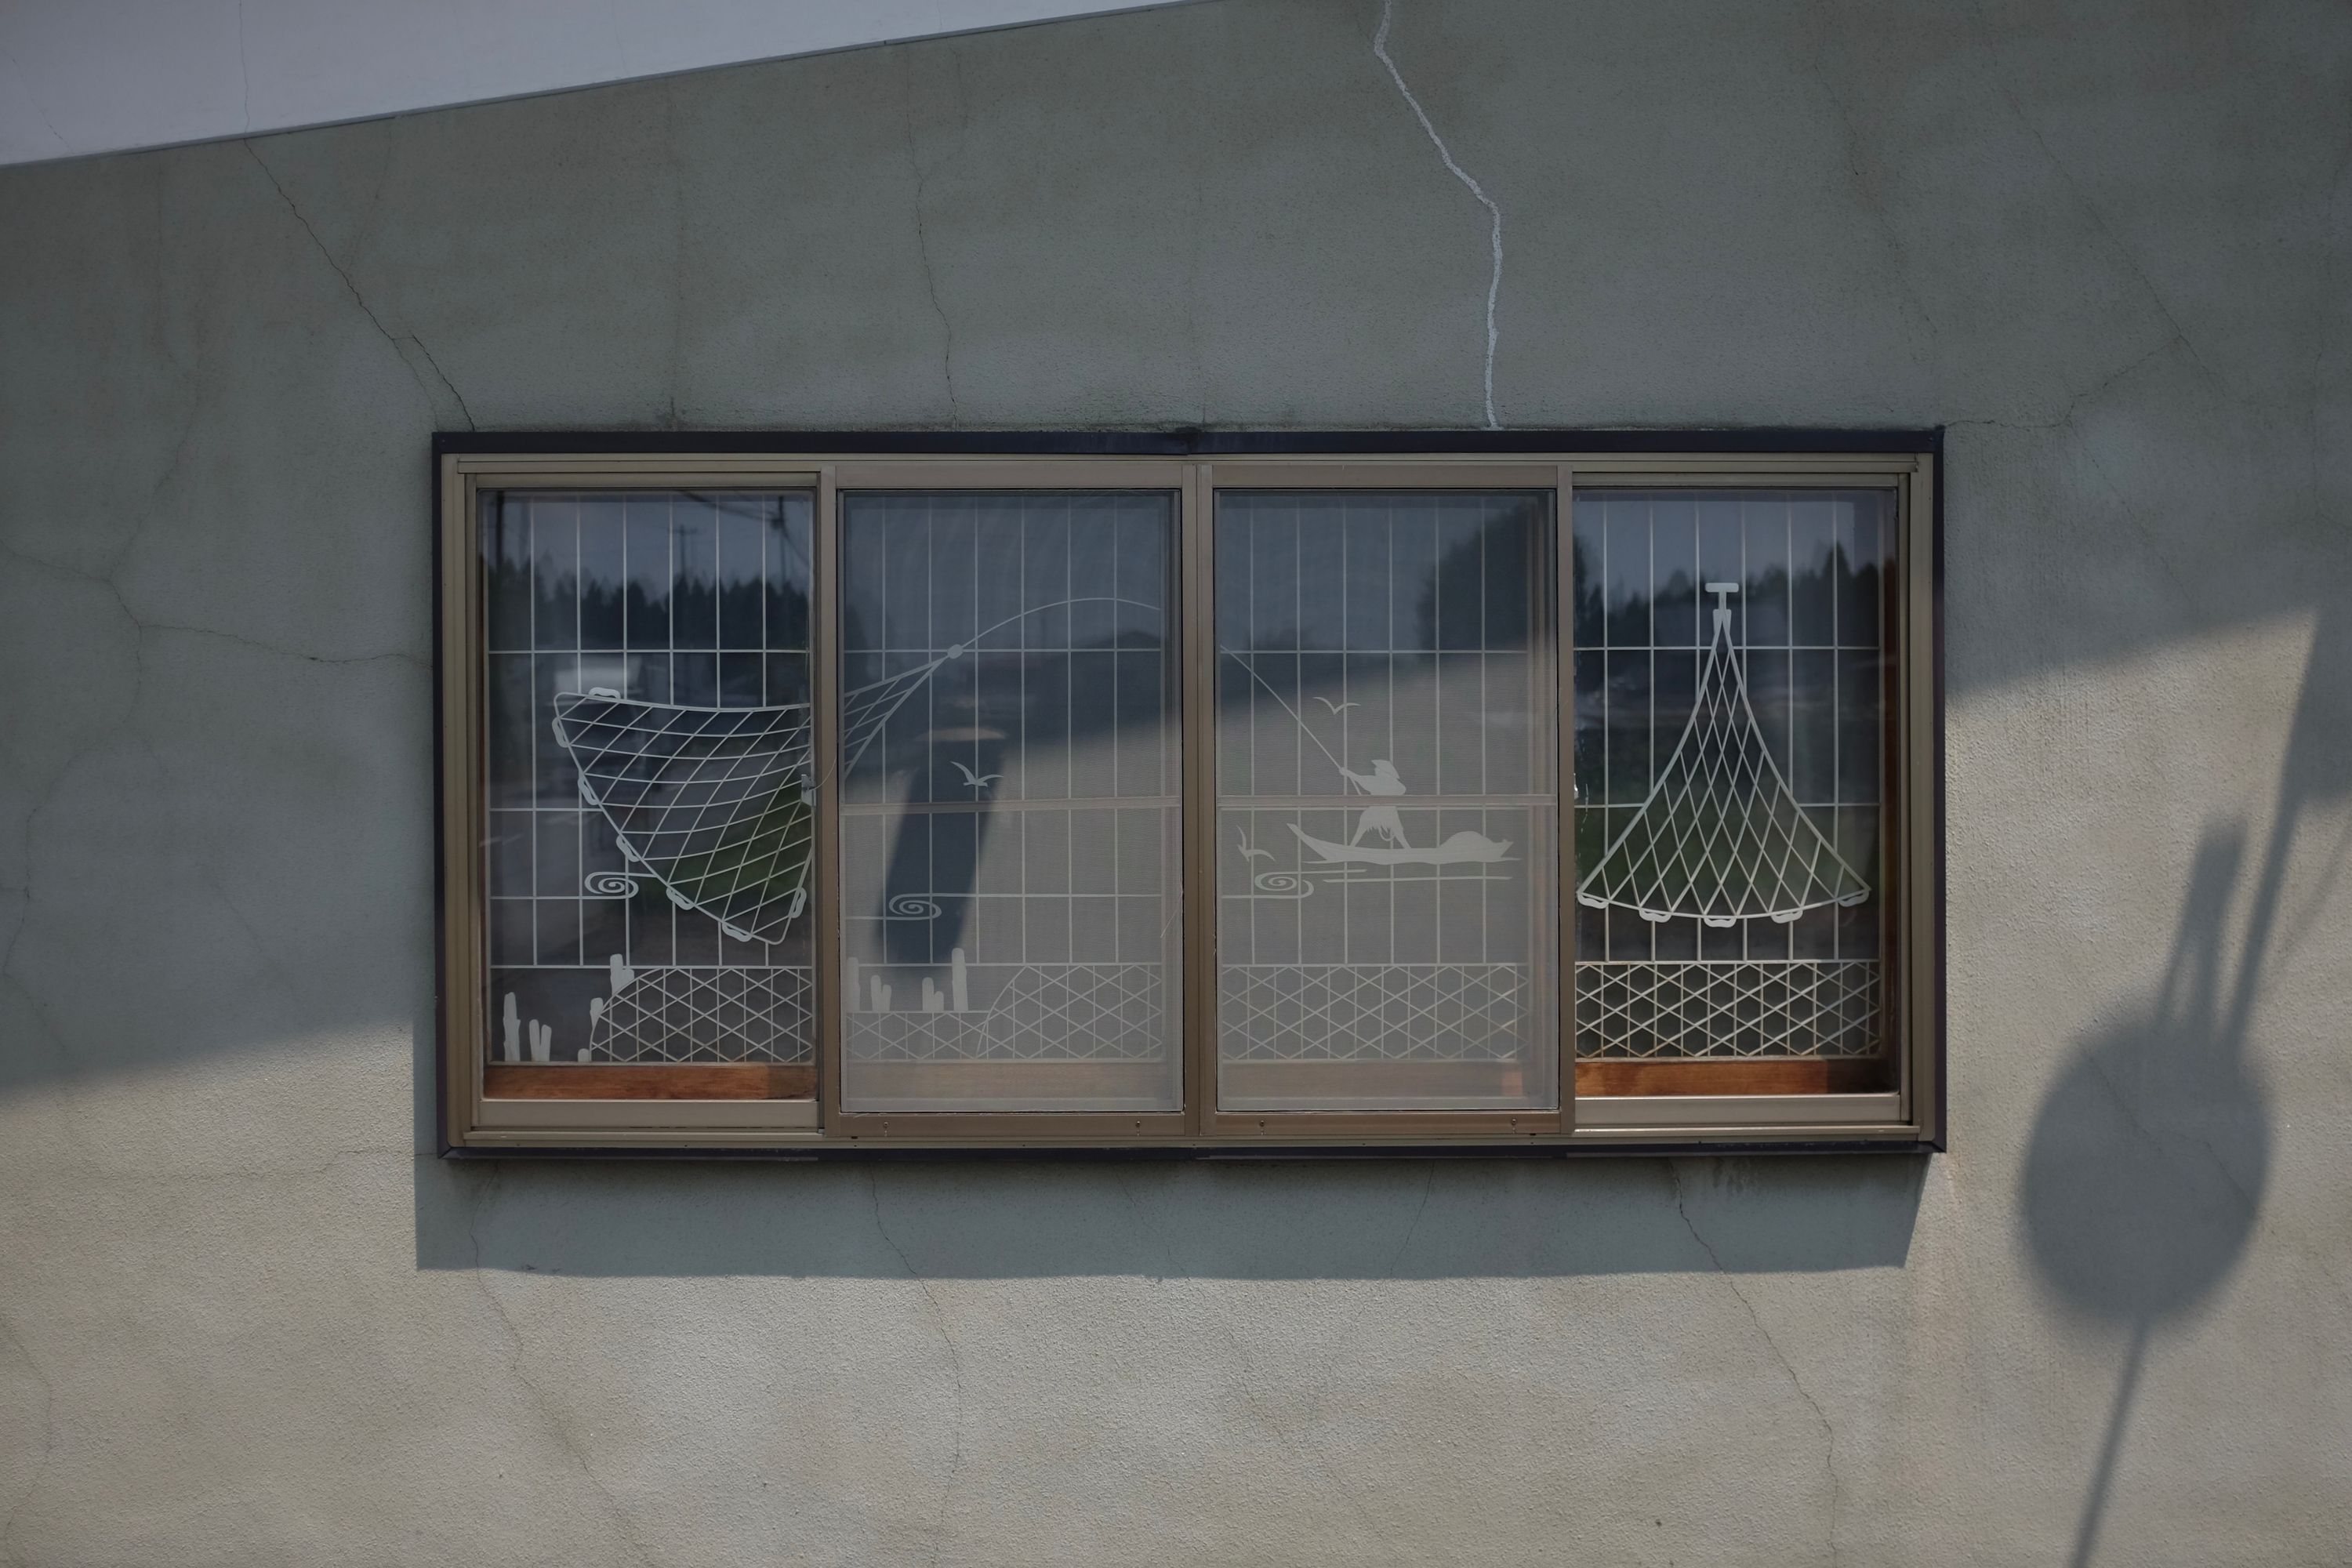 The window of a house features a line drawing of a person fishing with a net from a small boat.